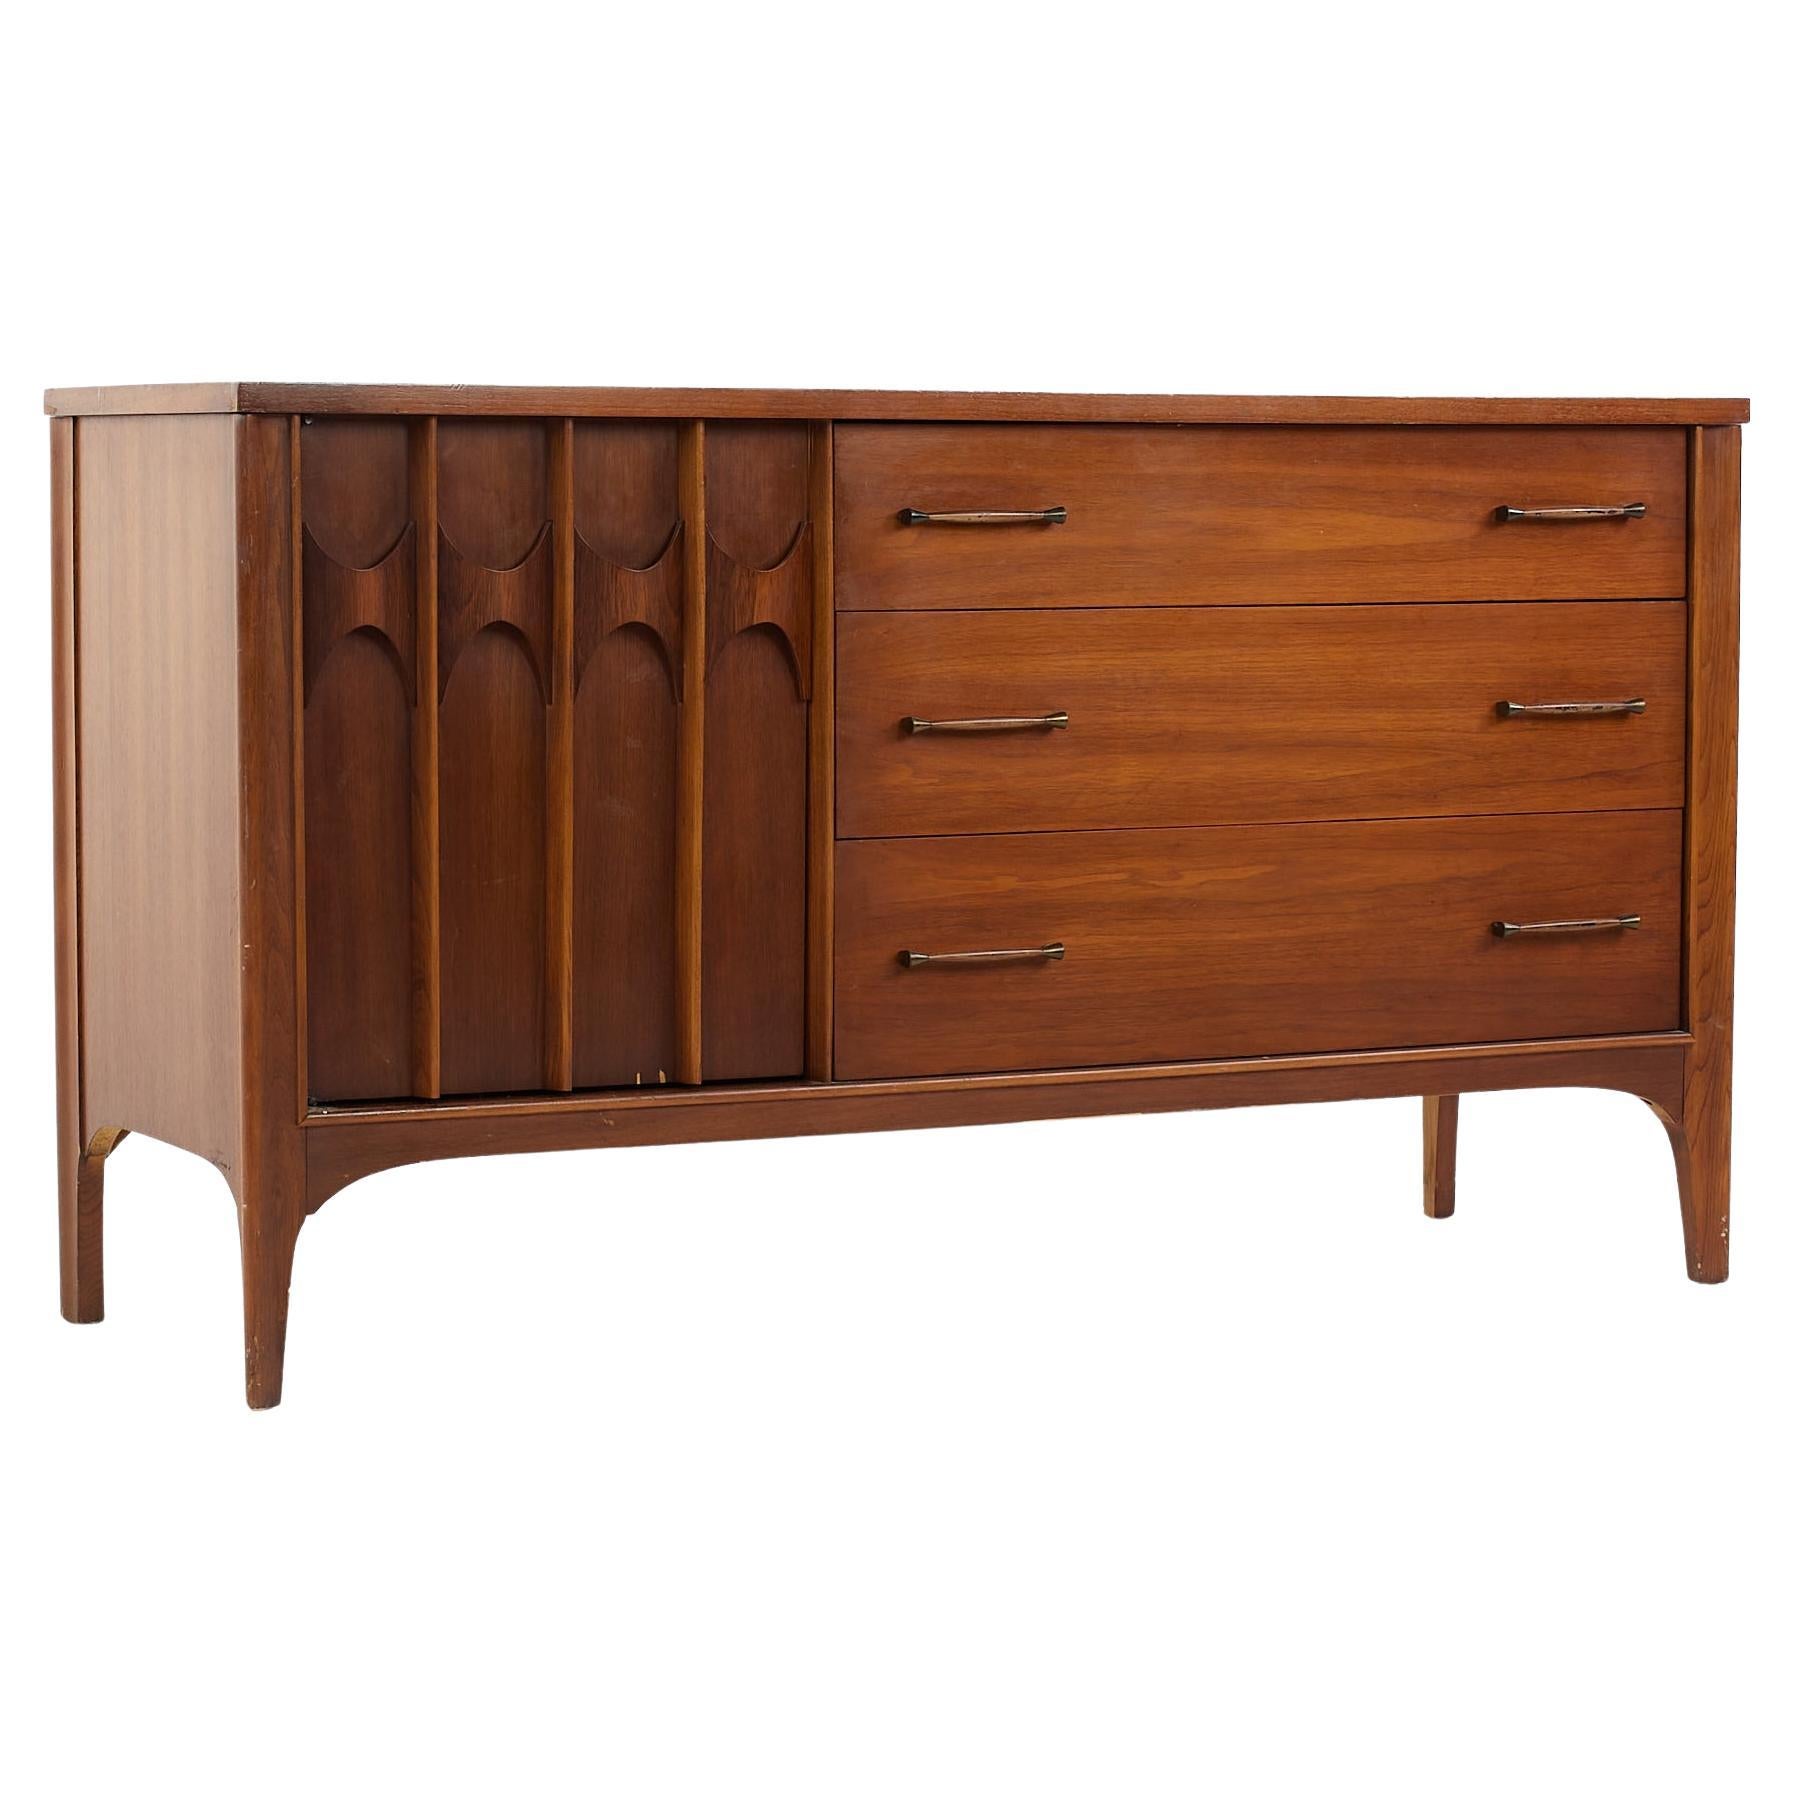 Kent Coffey Perspecta Mid-Century Walnut and Rosewood Credenza